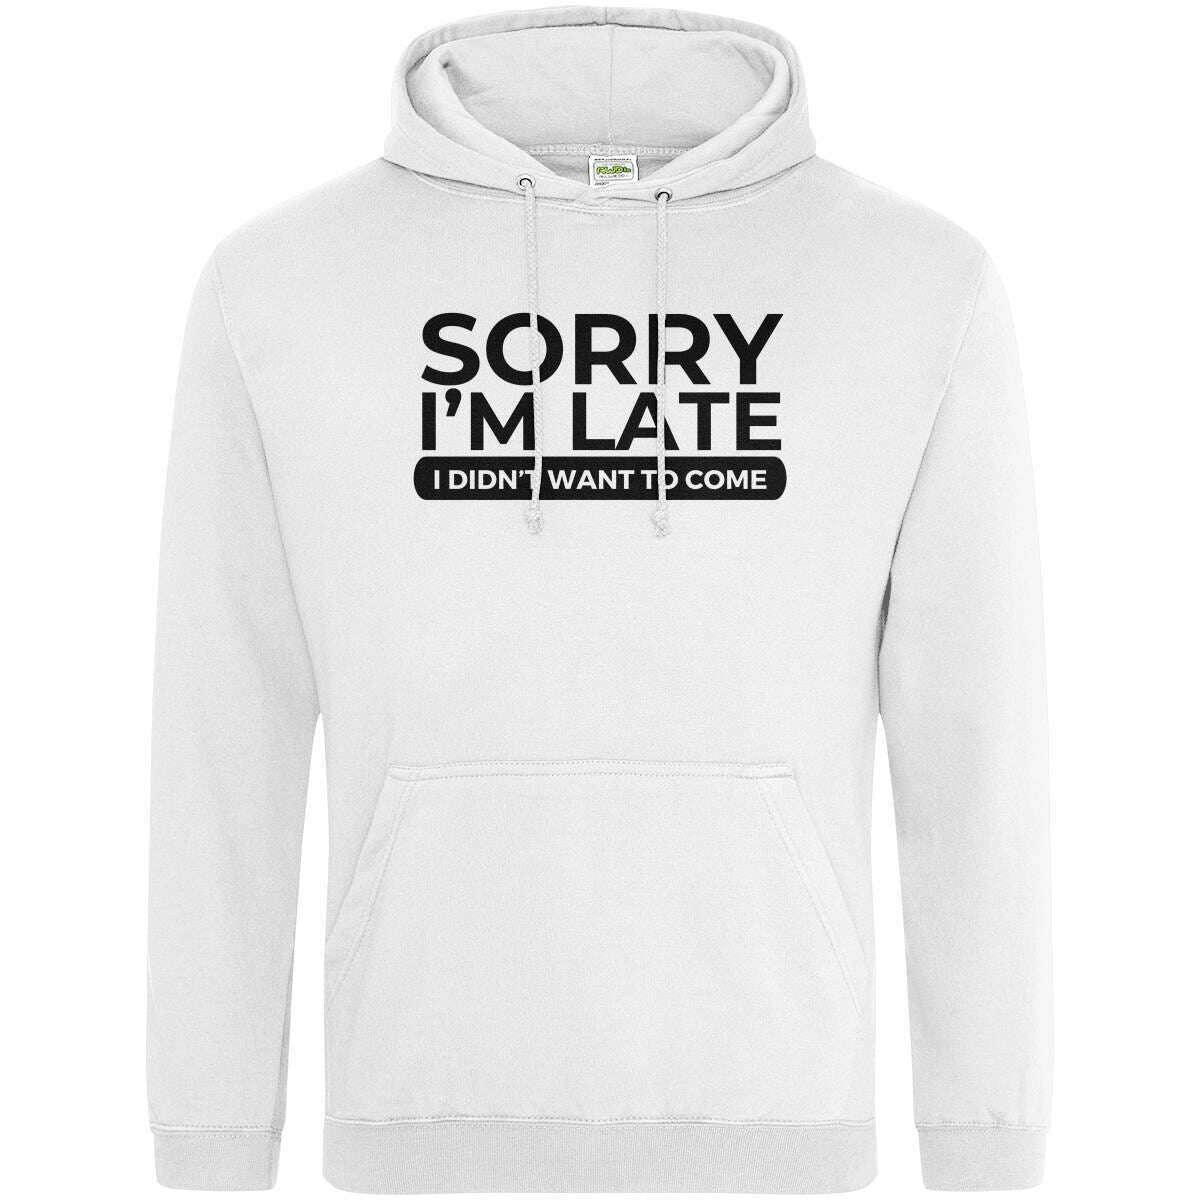 Teemarkable! Sorry I’m Late I Didn’t Want To Come Hoodie